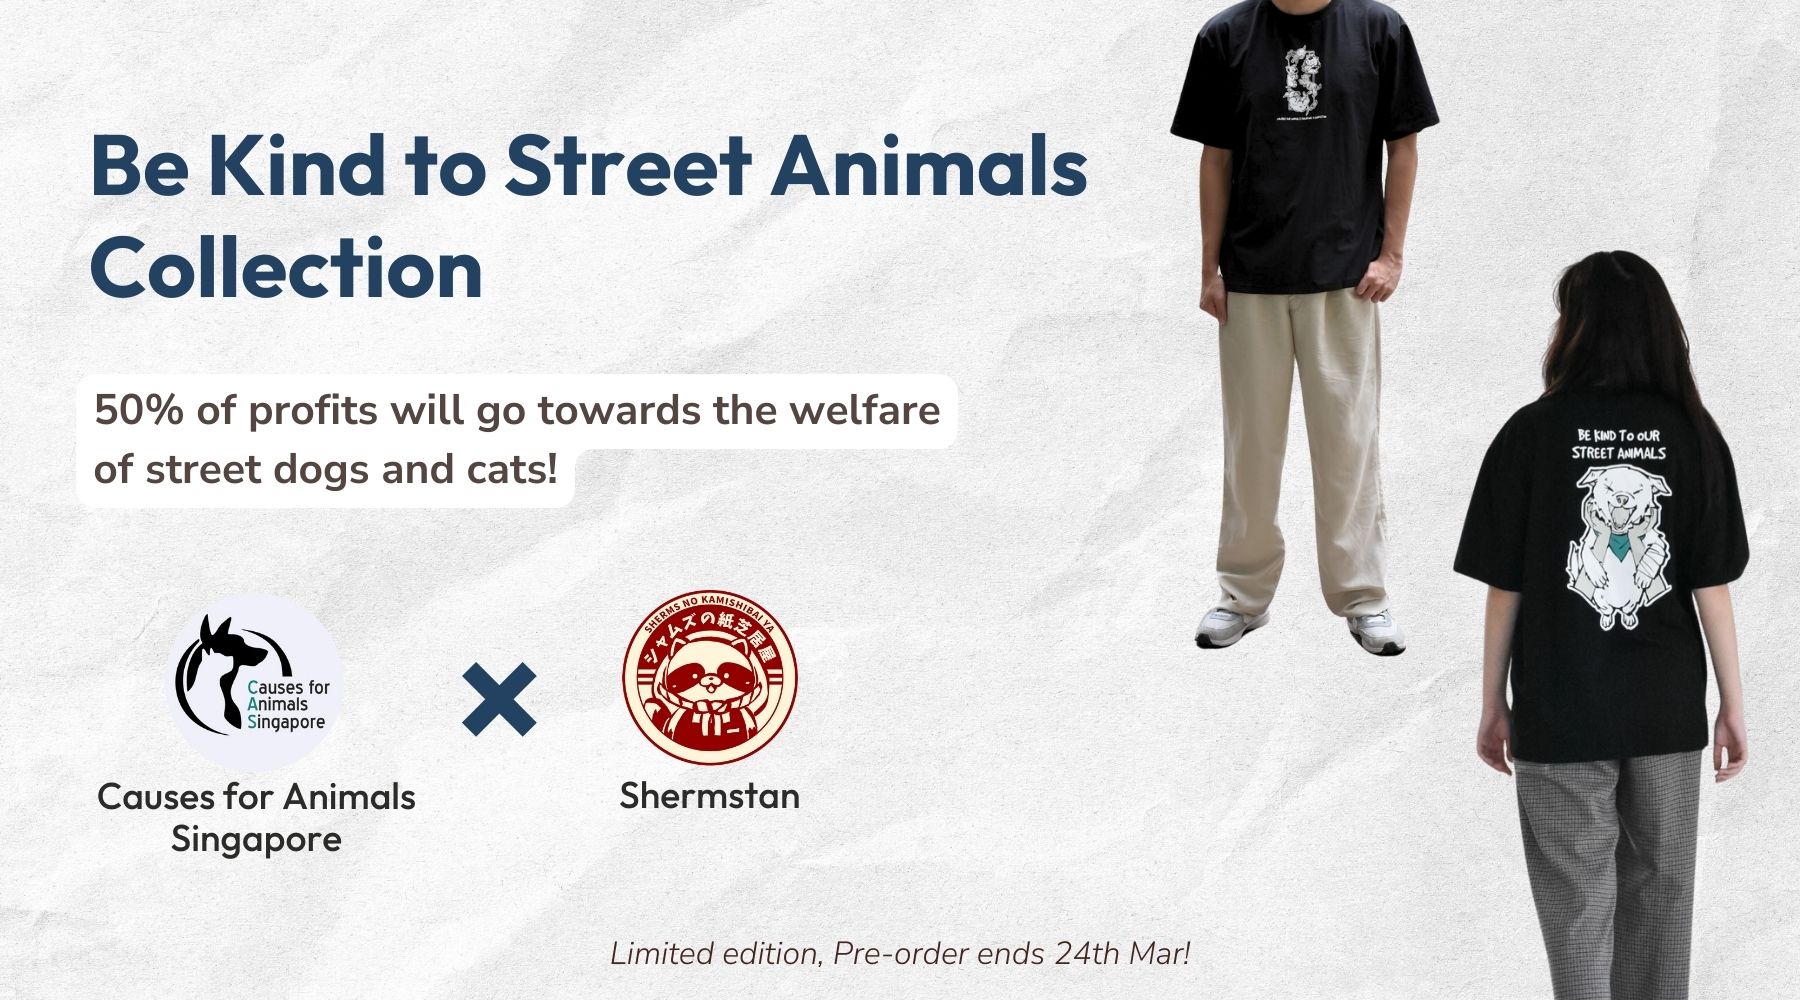 Causes for Animals Singapore X Shermstan - Be Kind To our Street Animals Collection